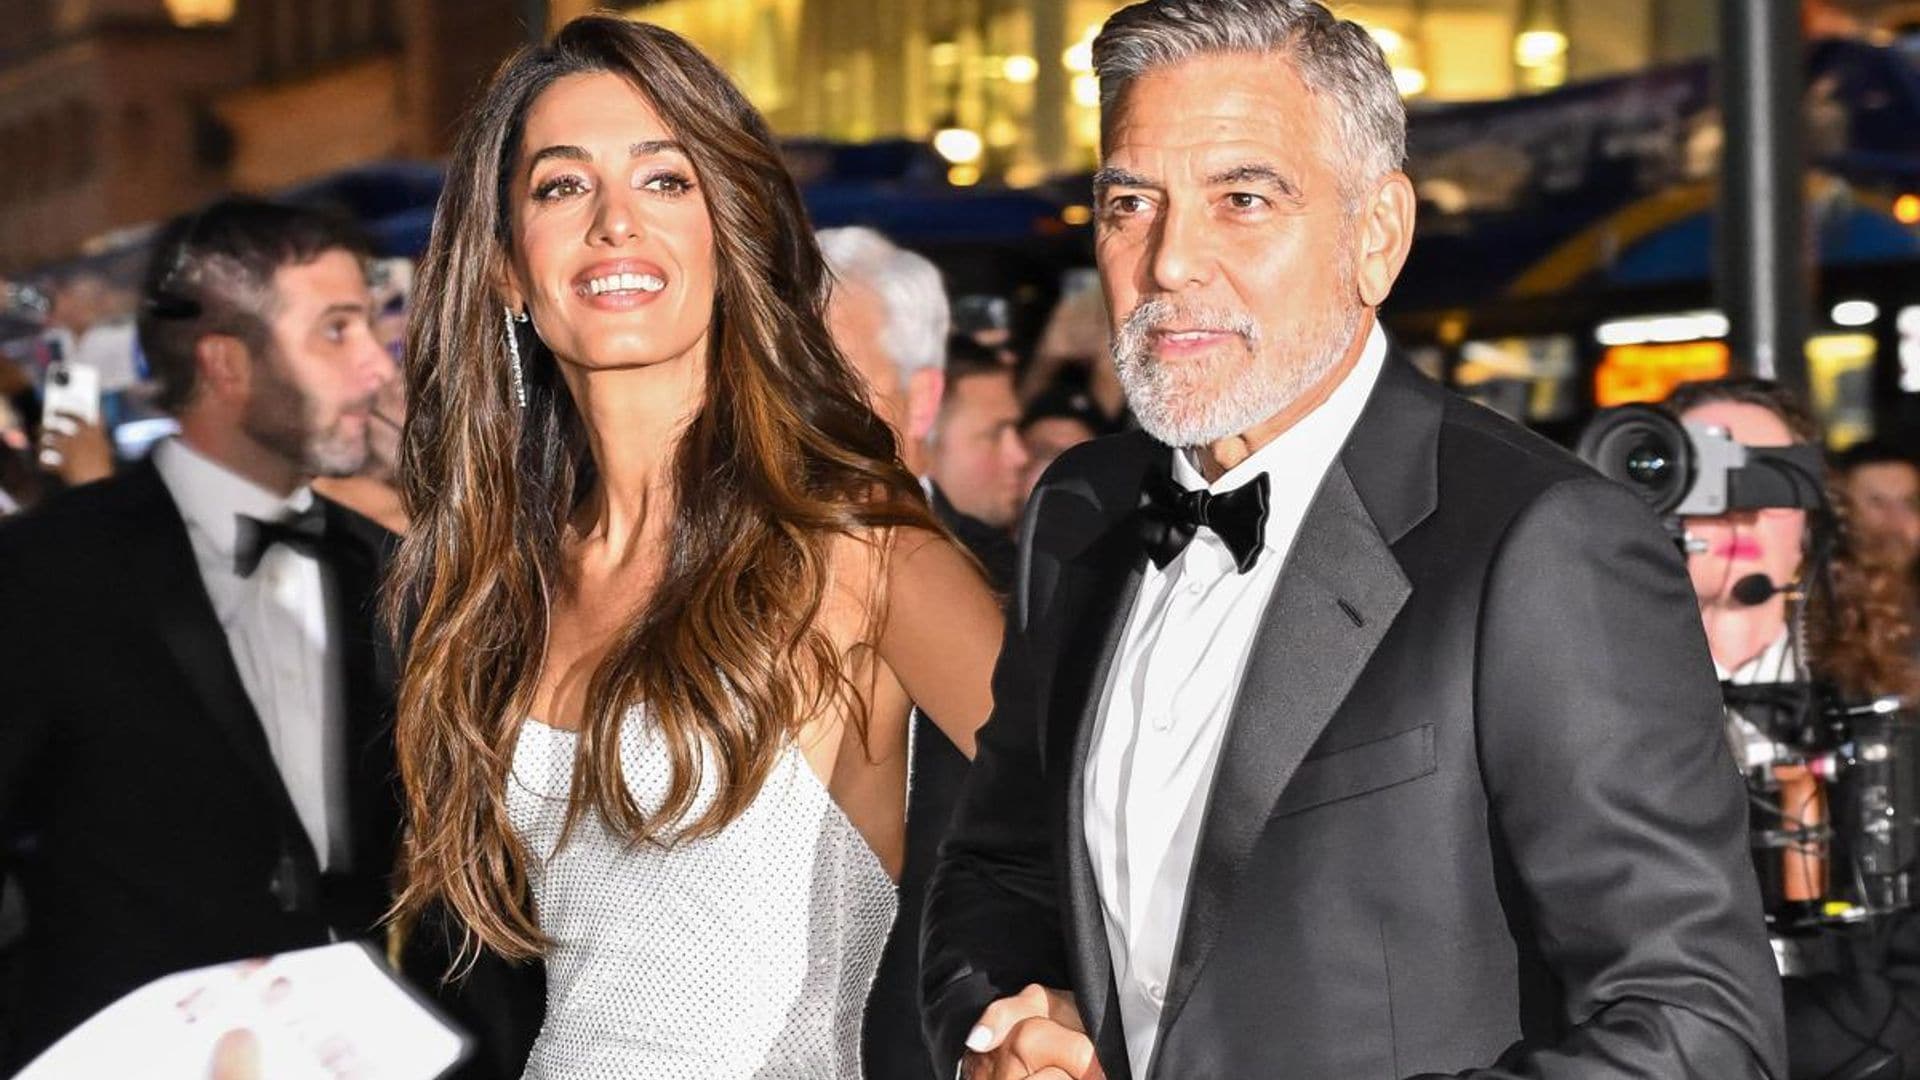 George Clooney reveals wedding anniversary gift for Amal Clooney and it’s not what you expect